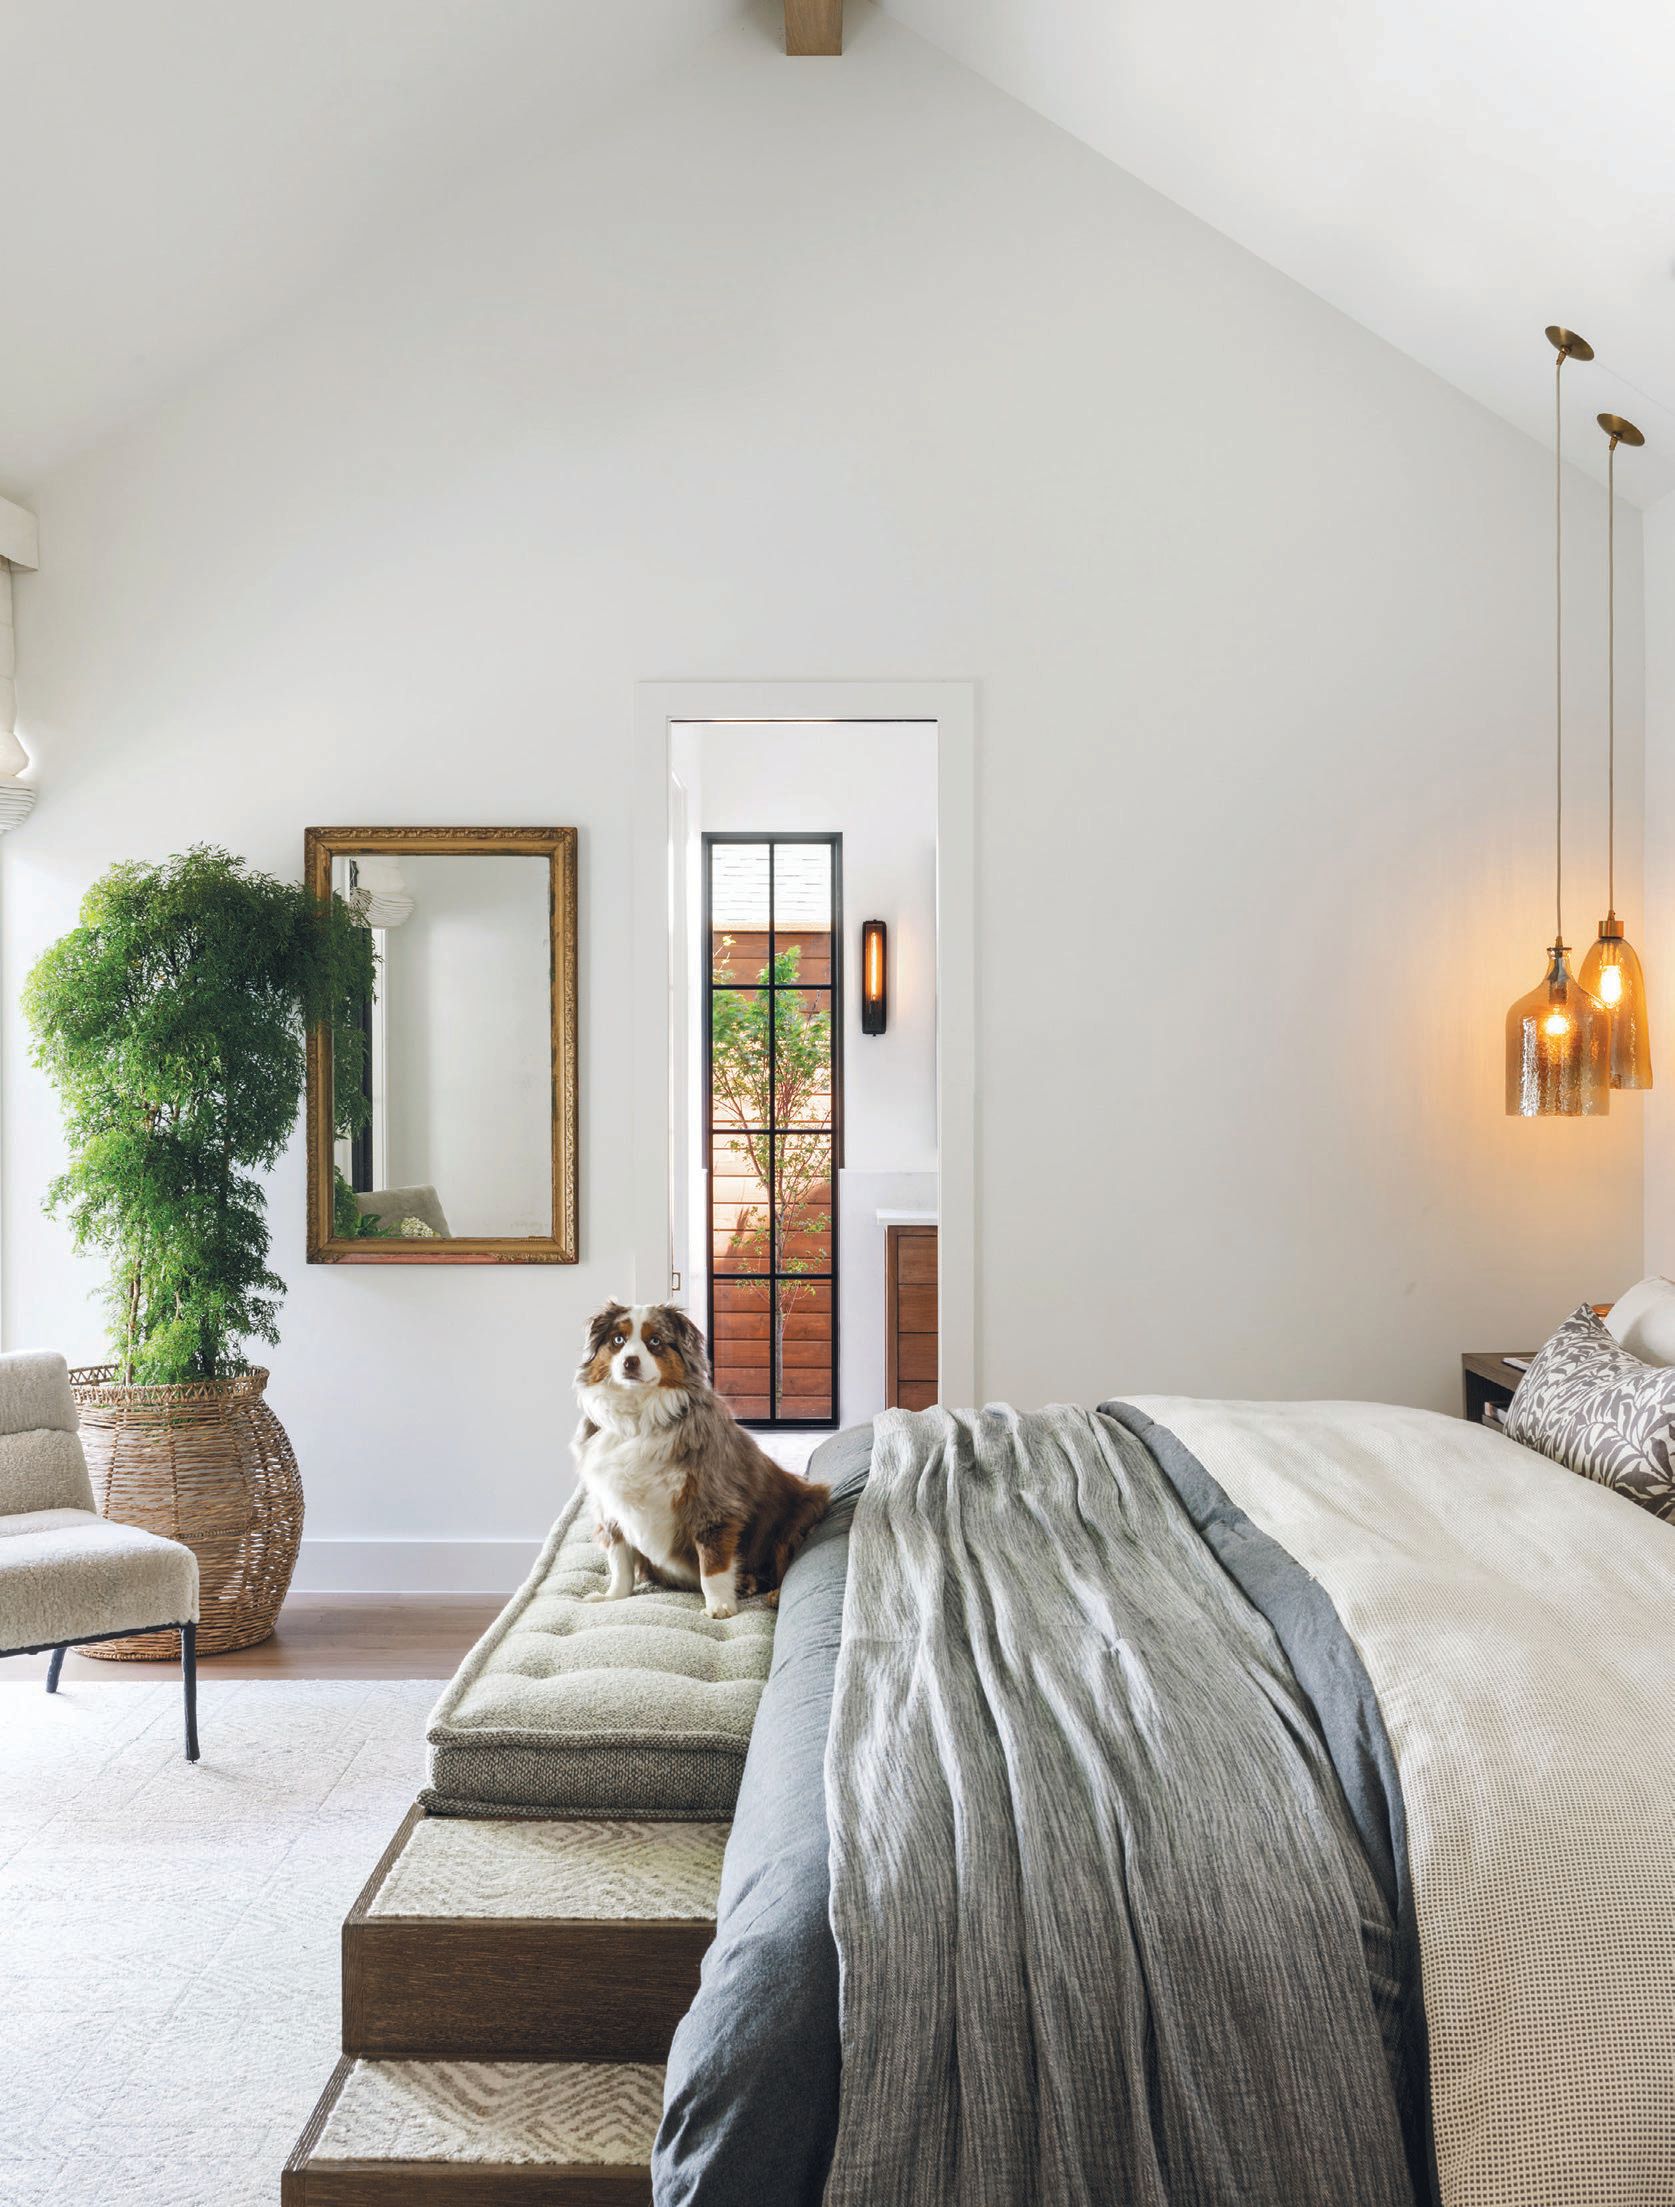 The primary bedroom’s large custom bed features a special staircase and bench for their beloved pooches. PHOTOGRAPHED BY BLAKE VERDOORN